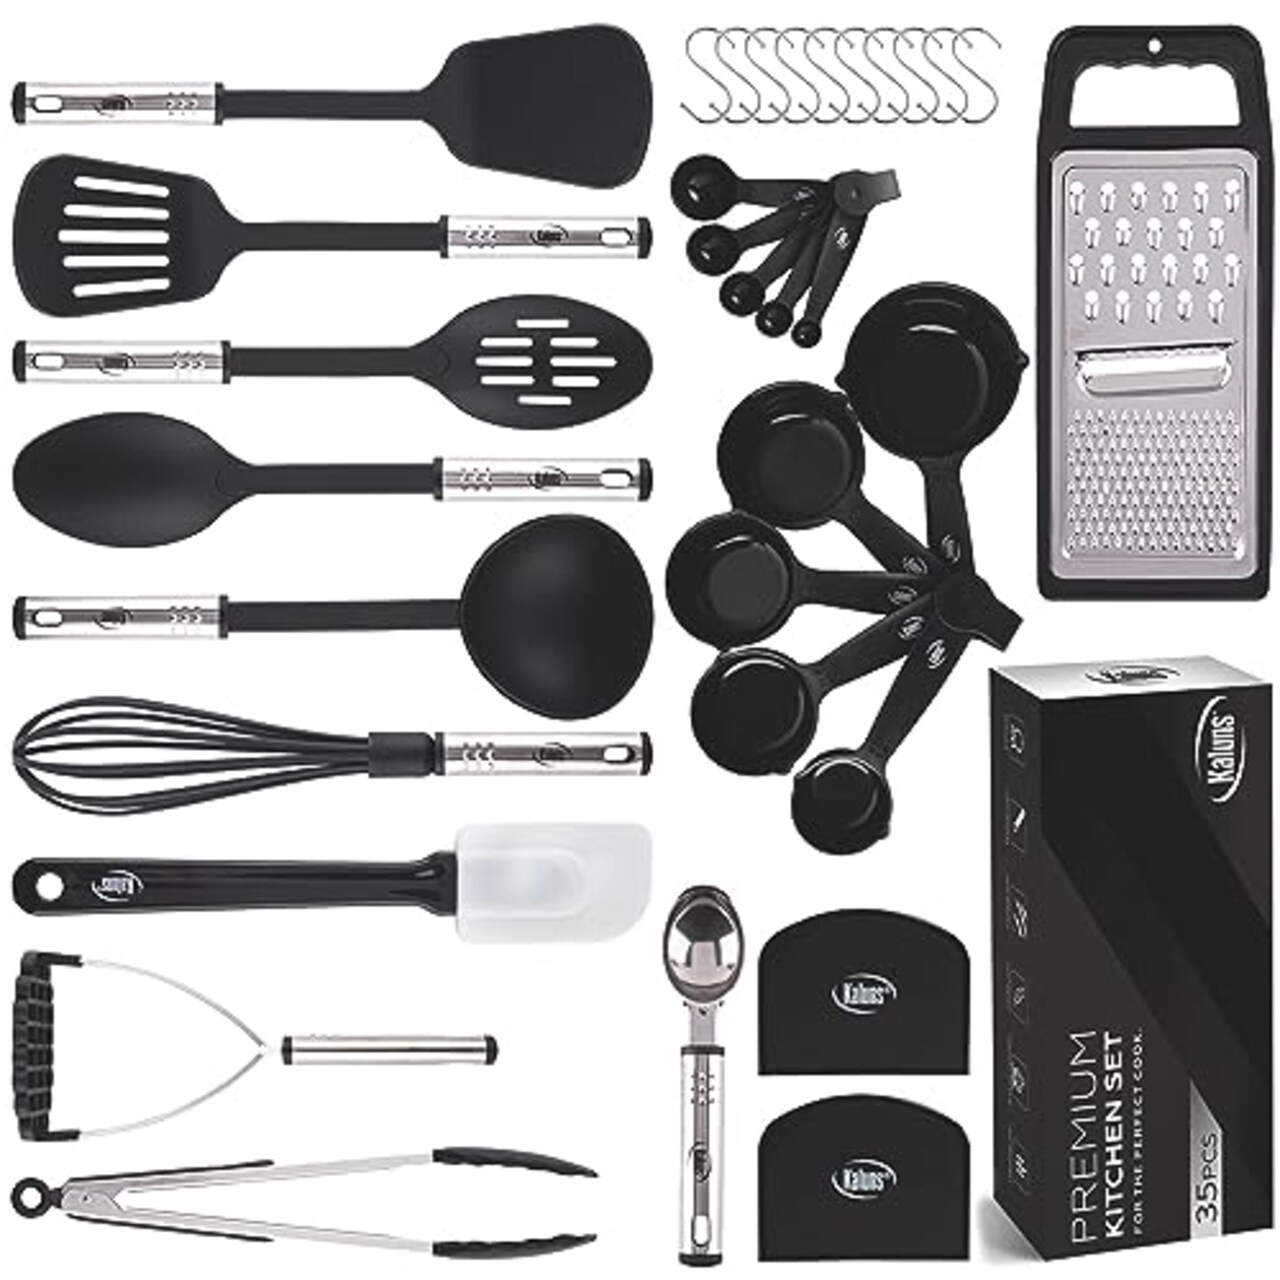 Kitchen Utensils Set Cooking Utensil Sets, Nylon and Stainless Steel  Kitchen Gadgets Nonstick and Heat Resistant Home, House, Apartment  Essentials Kitchen Accessories Must Haves Pots and Pans set